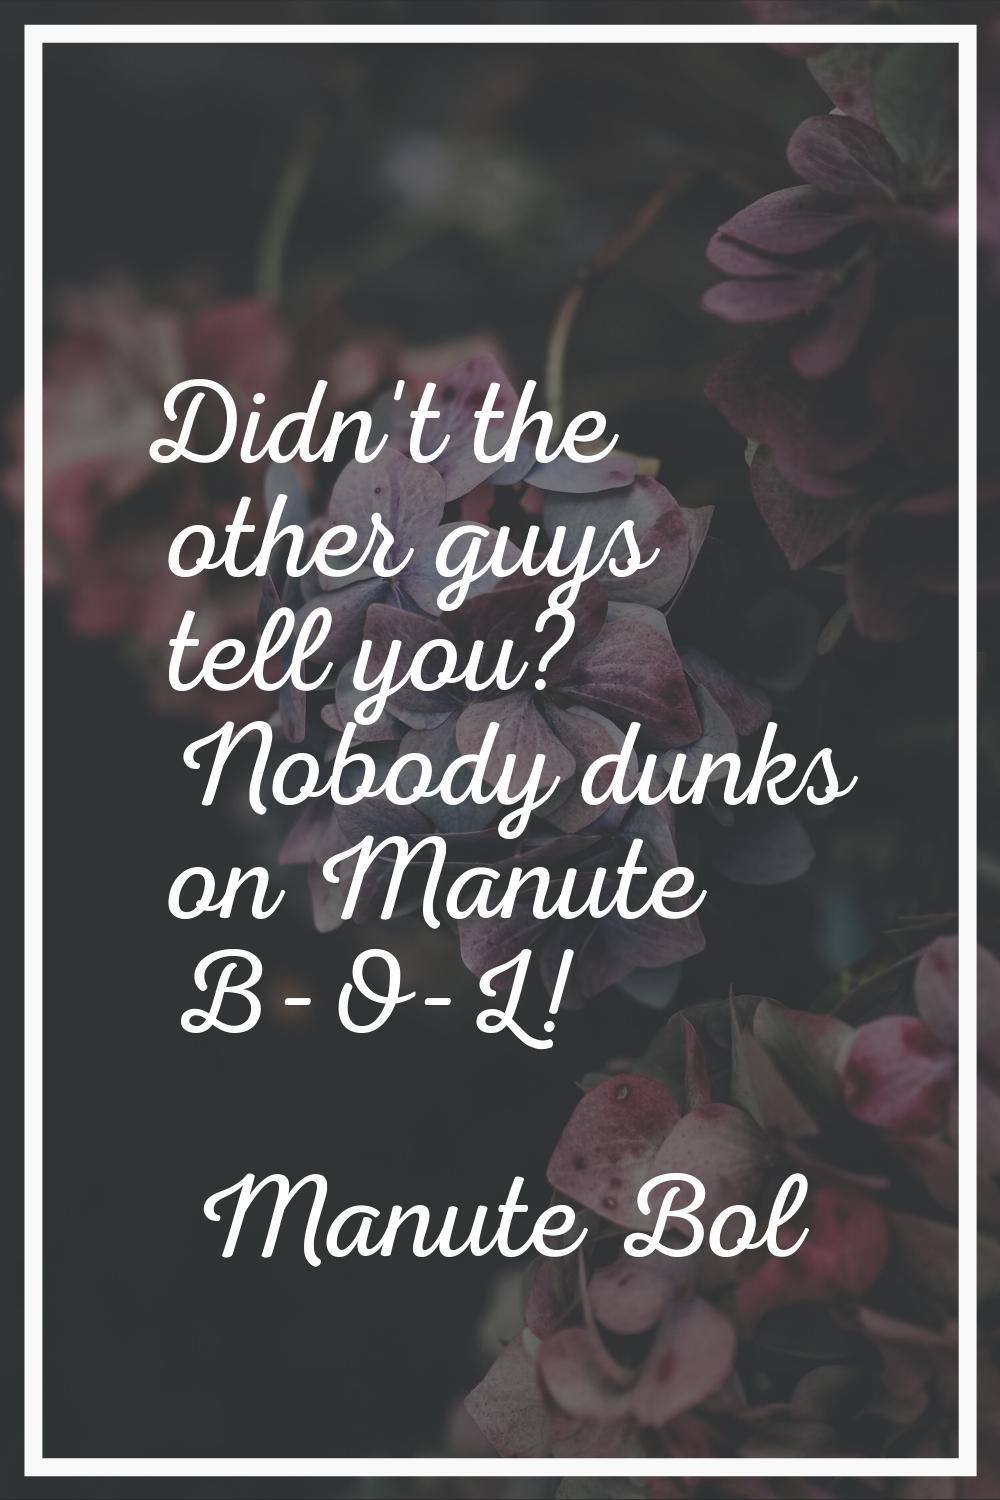 Didn't the other guys tell you? Nobody dunks on Manute B-O-L!